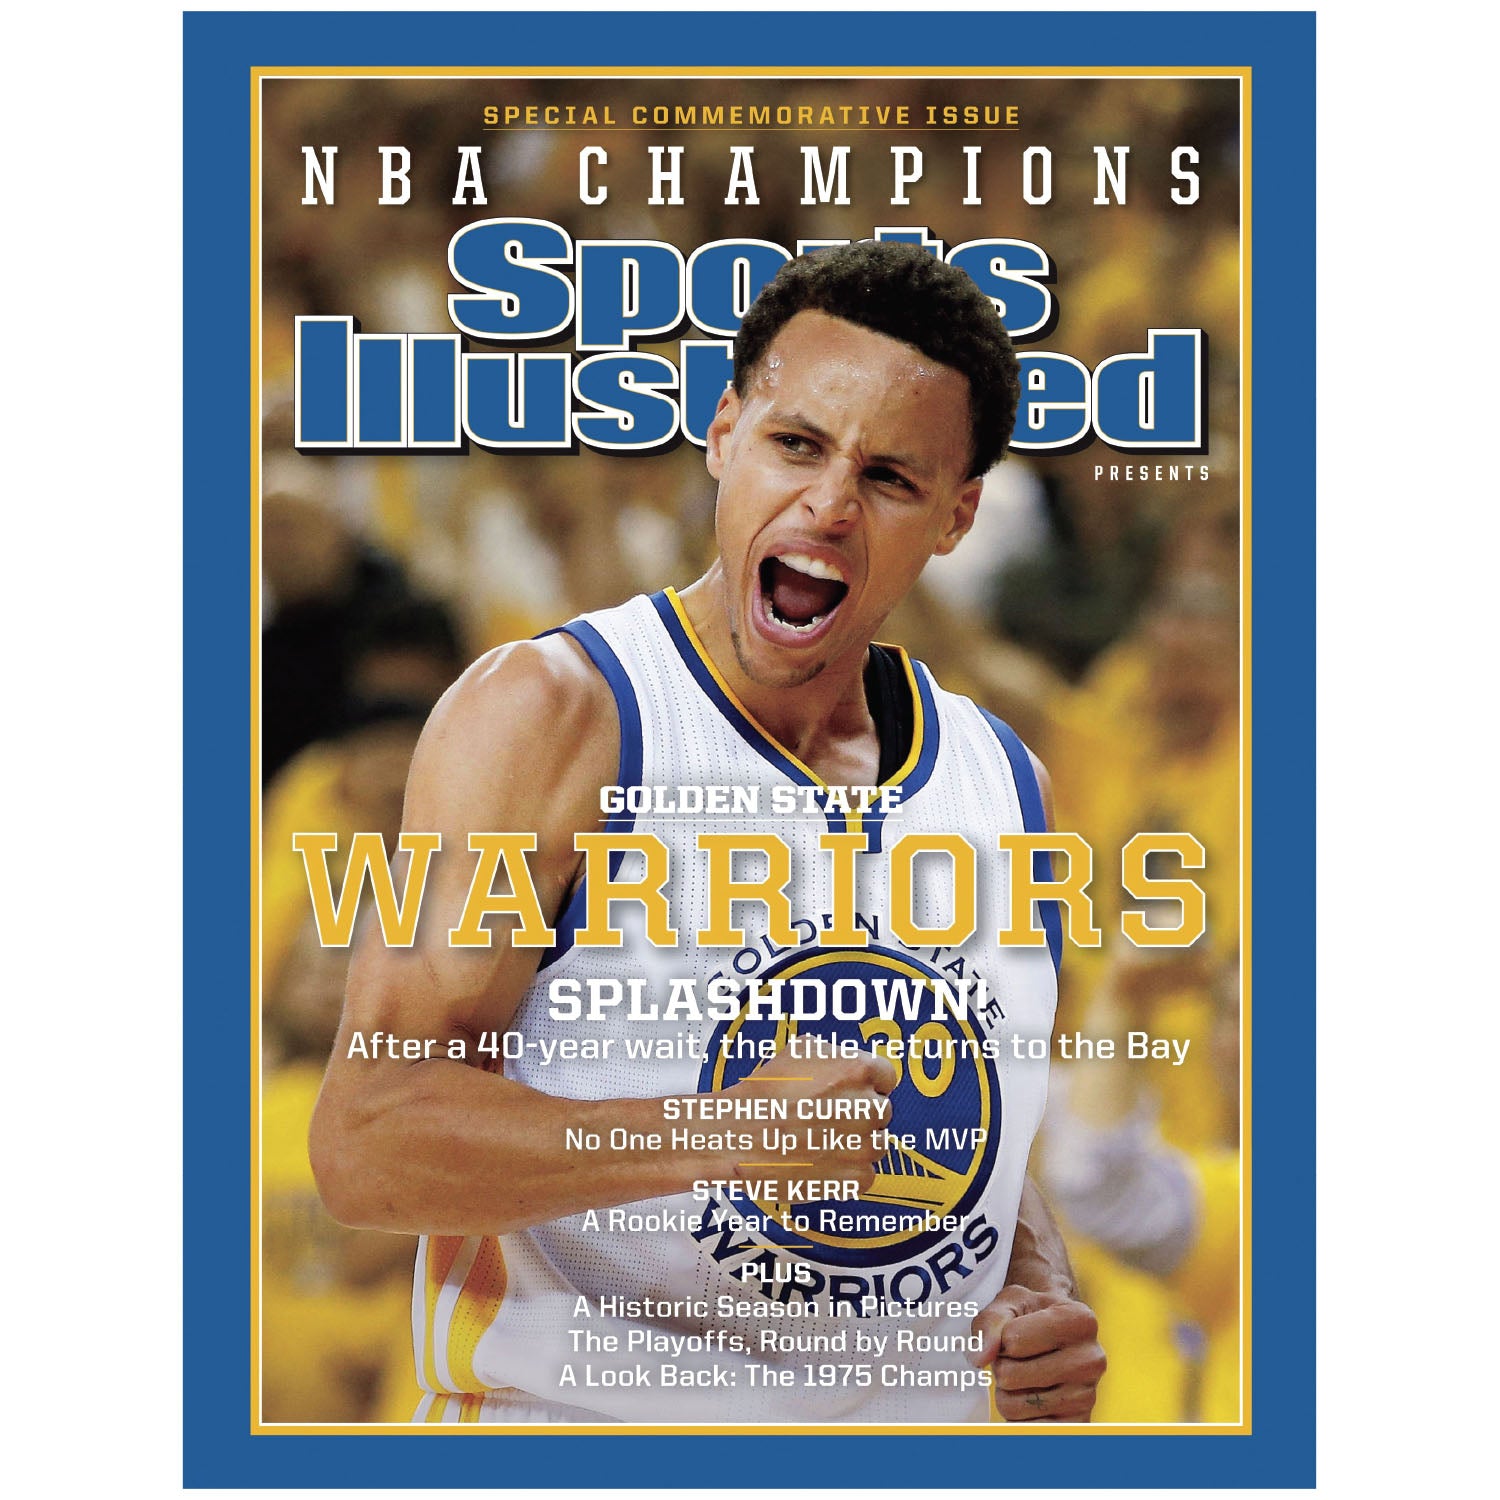 Fathead on X: Night, Night! 😴🏆 Celebrate the 2021-2022 NBA Champions,  the Golden State Warriors with our commemorative Steph Curry “Night, Night”  Mural!  #NbaFinals #GSWvsBOS #NBAChampions2022   / X